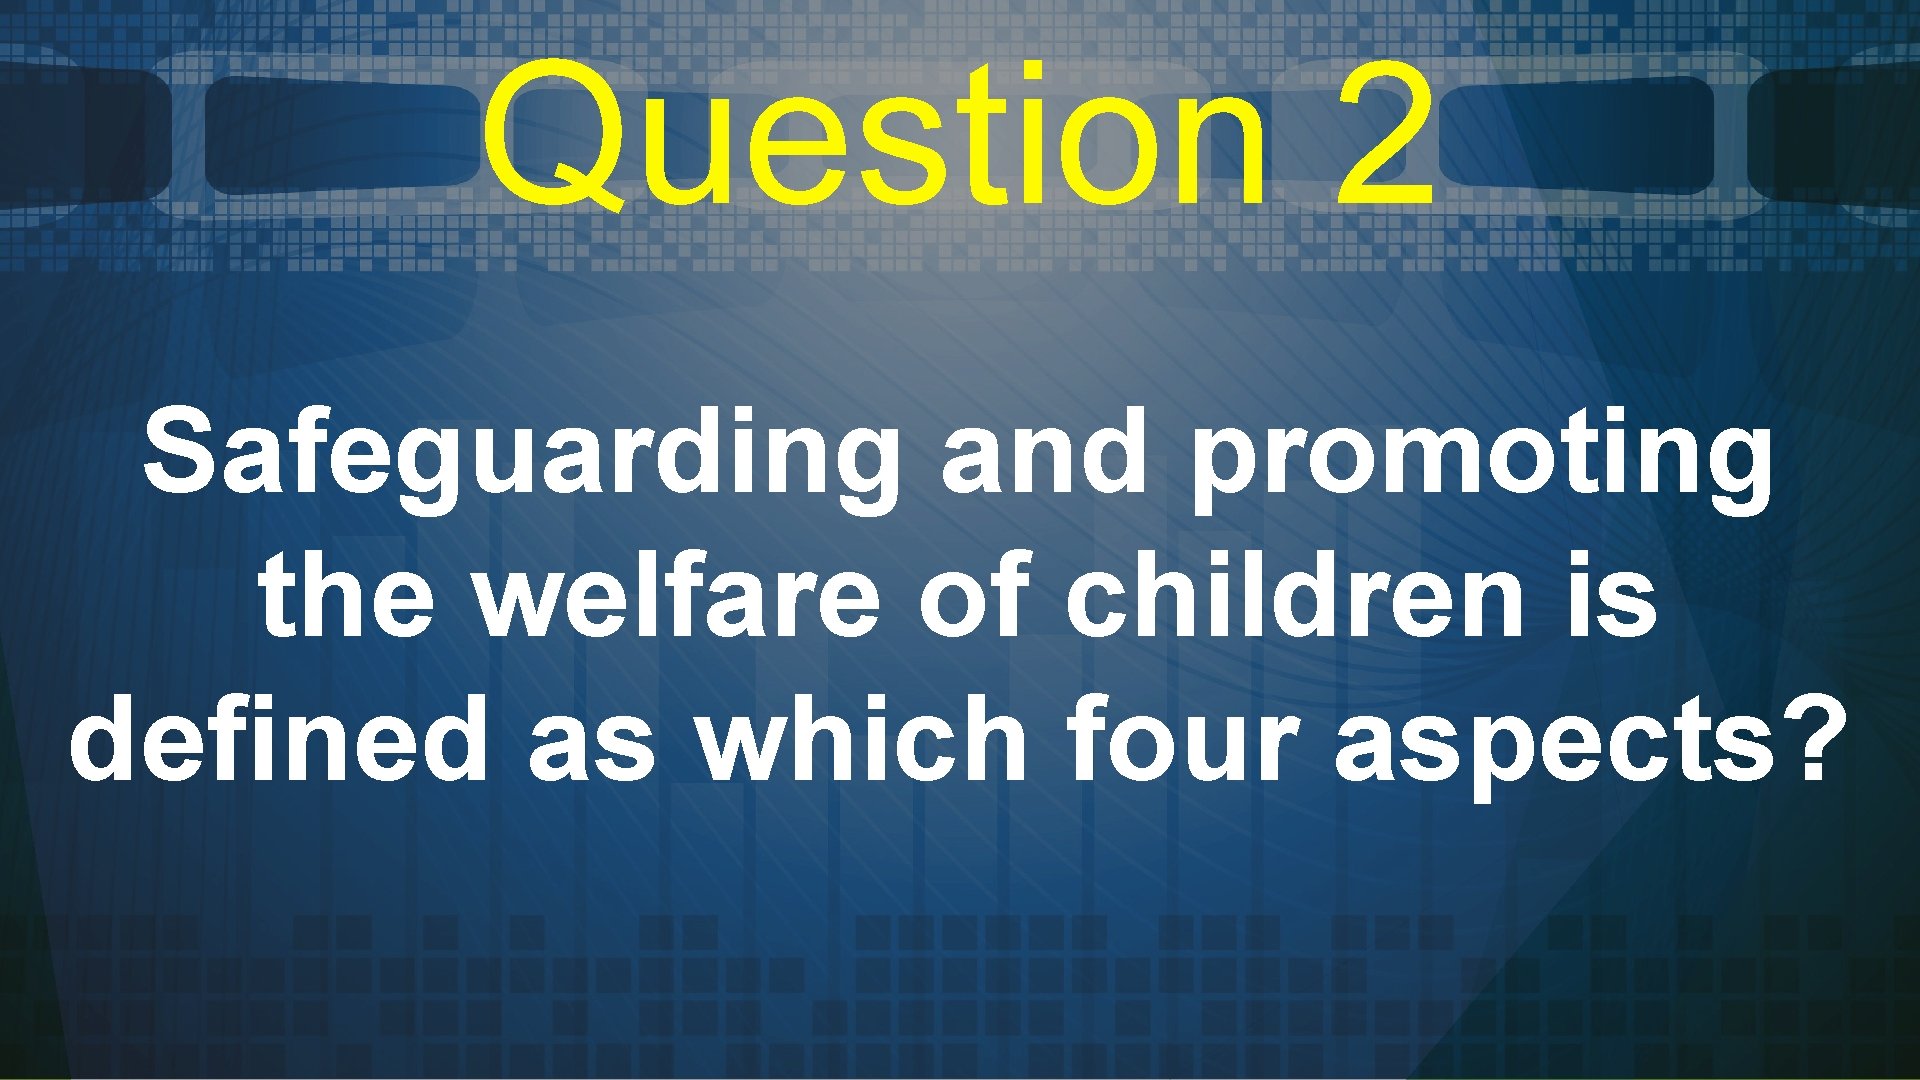 Question 2 Safeguarding and promoting the welfare of children is defined as which four